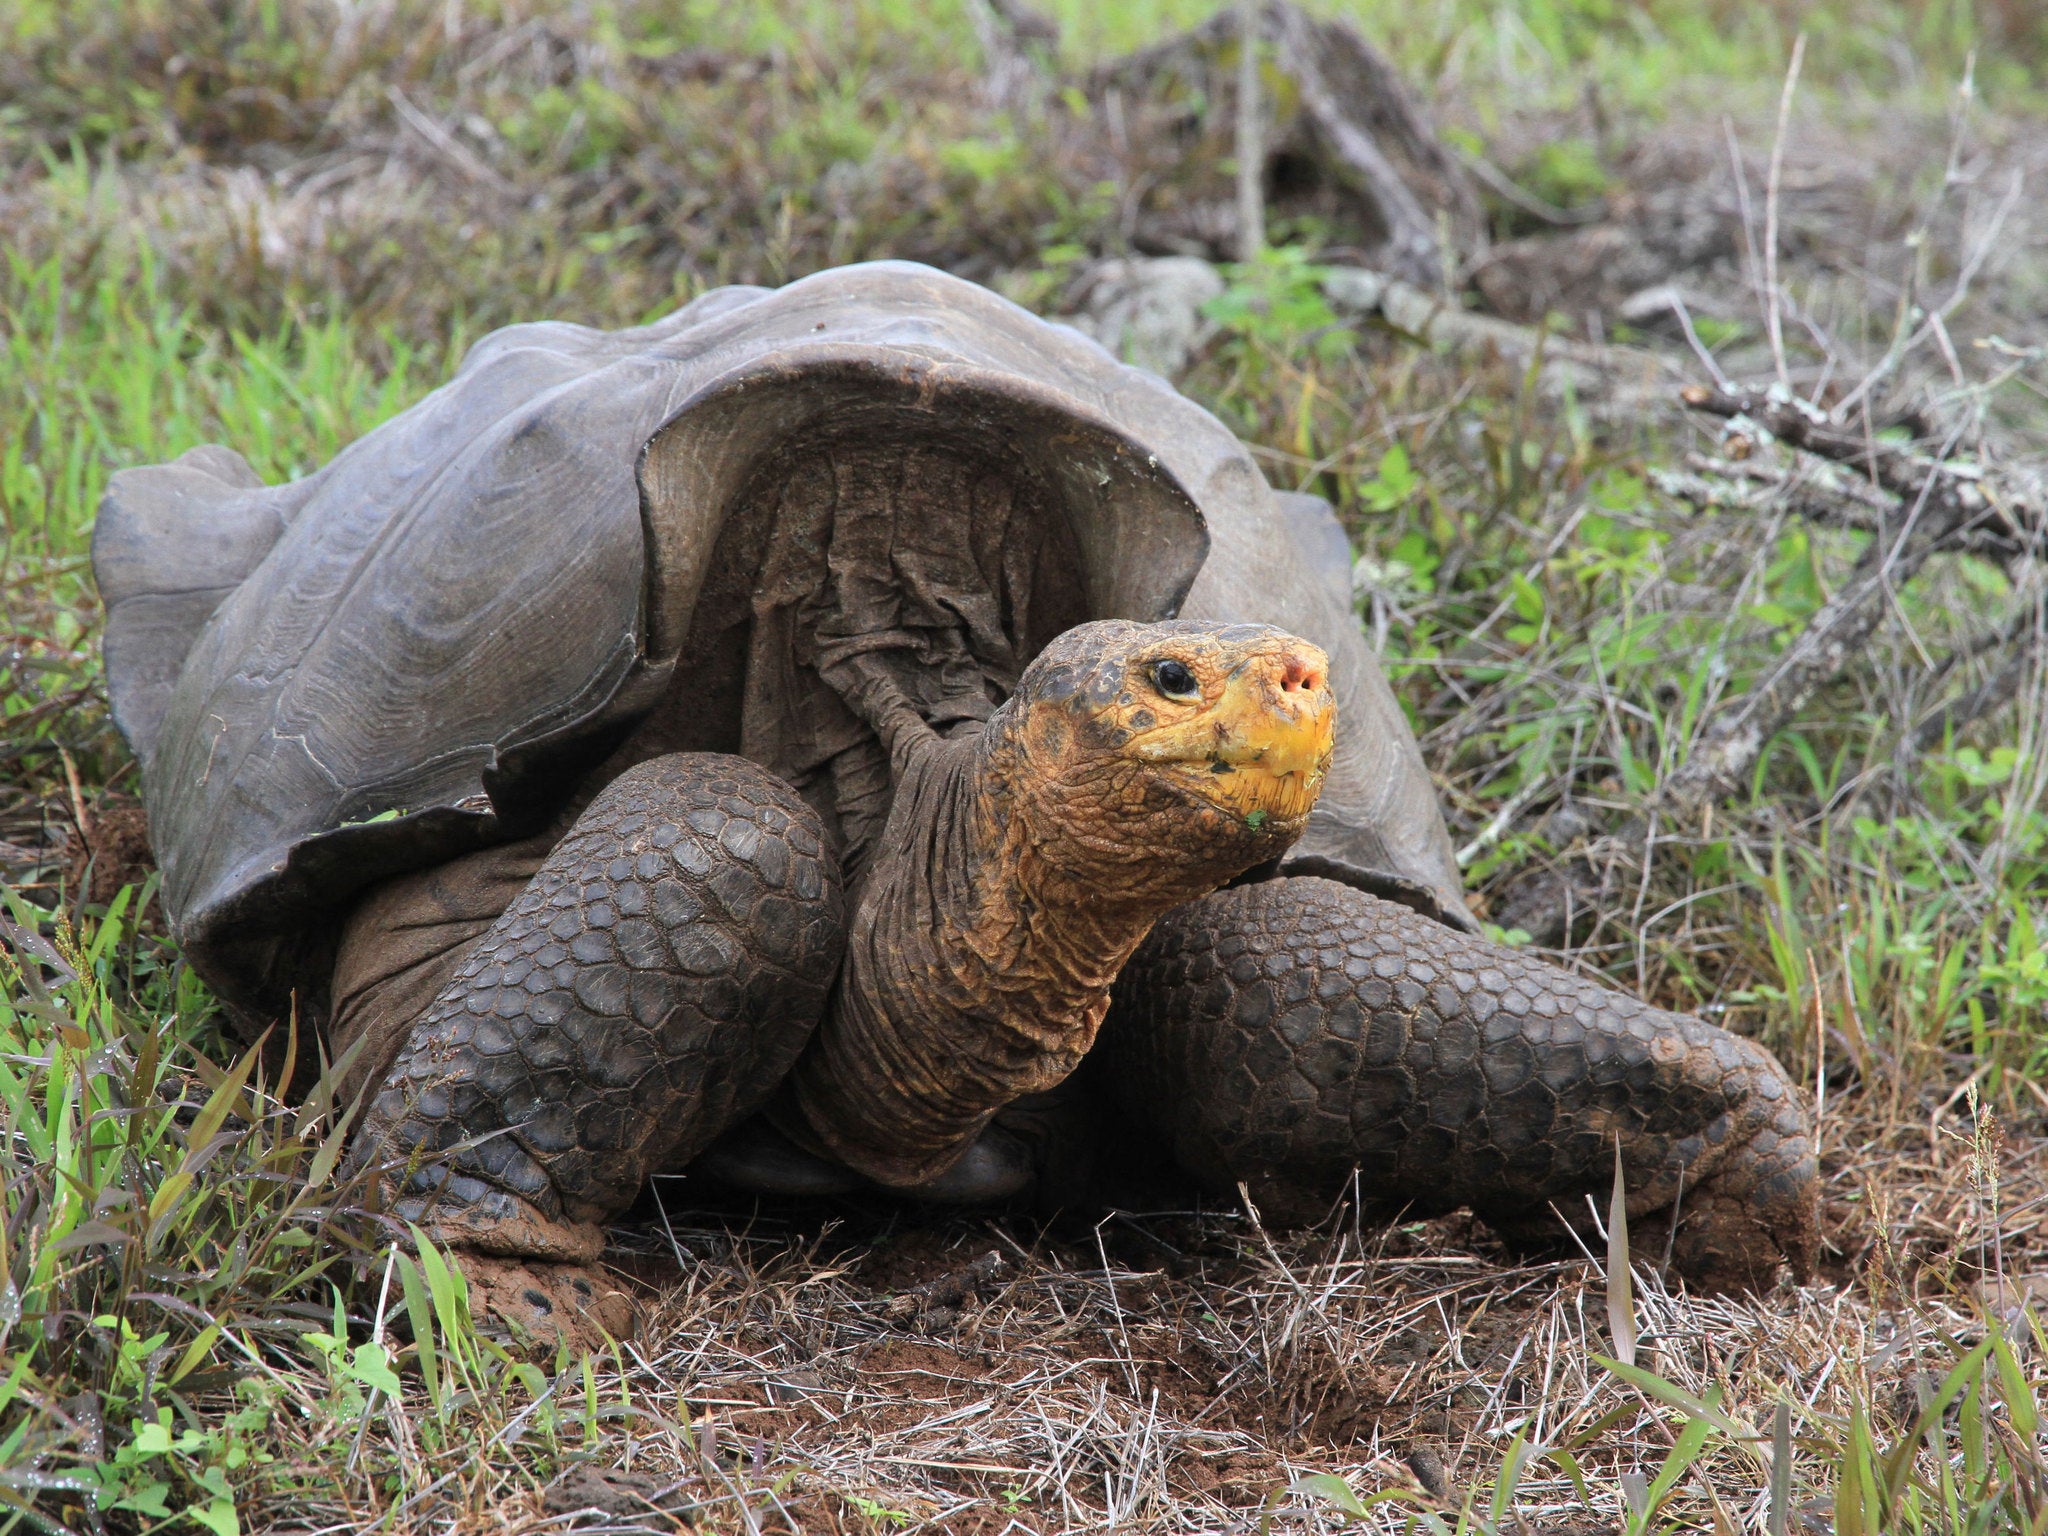 The giant tortoises on the Galapagos island of Español has been brought back from the brink of extinction